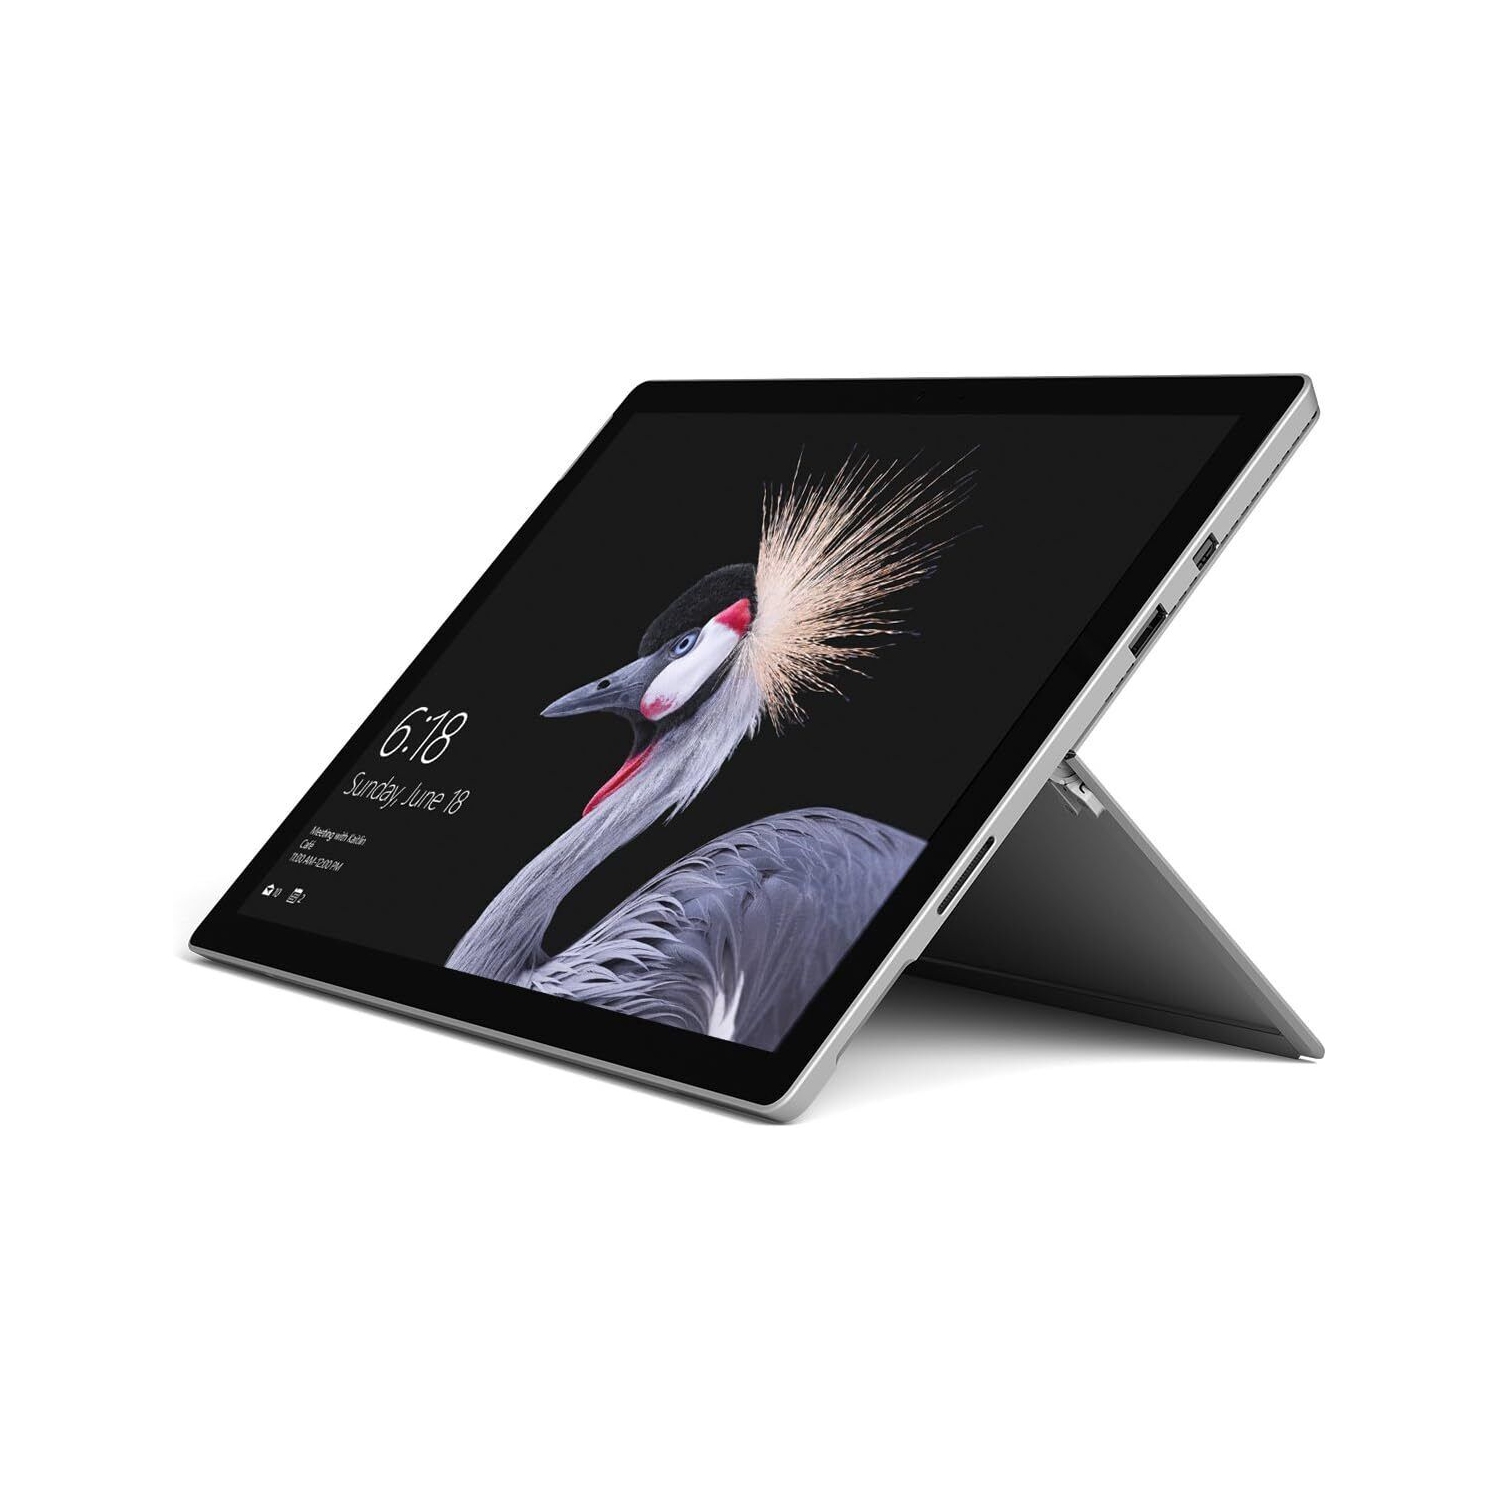 Refurbished (Excellent) Microsoft SURFACE PRO 5 TABLET Laptop 12.3" (I5-7300U / 8GB / 256 GB/Windows 10 Pro) with Keyboard Dock